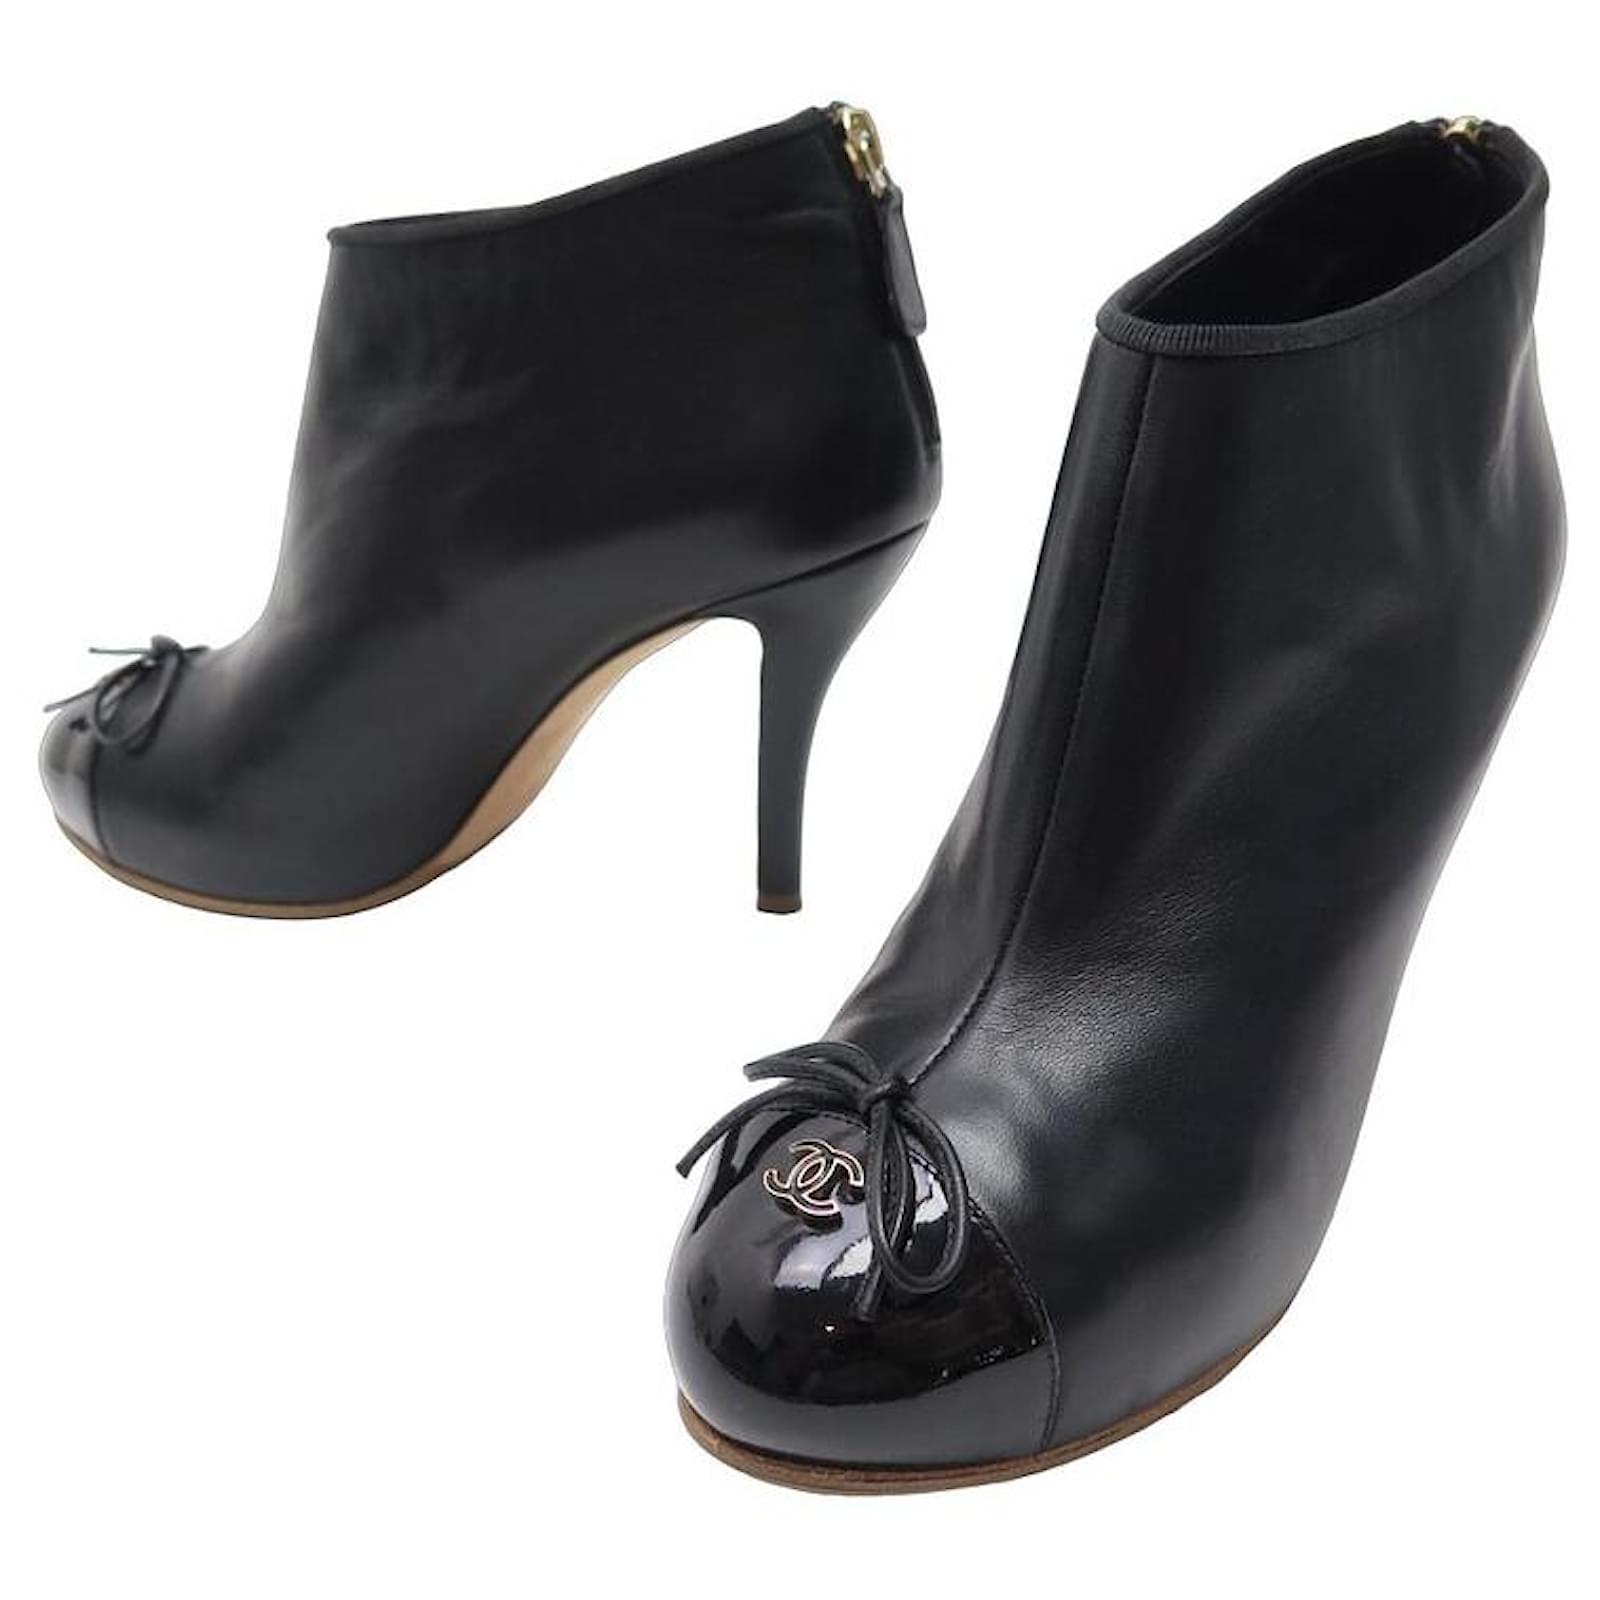 Ankle Boots Chanel New Chanel Shoes CC G Logo Ankle BOOTS28409 38.5 Black Leather + Box